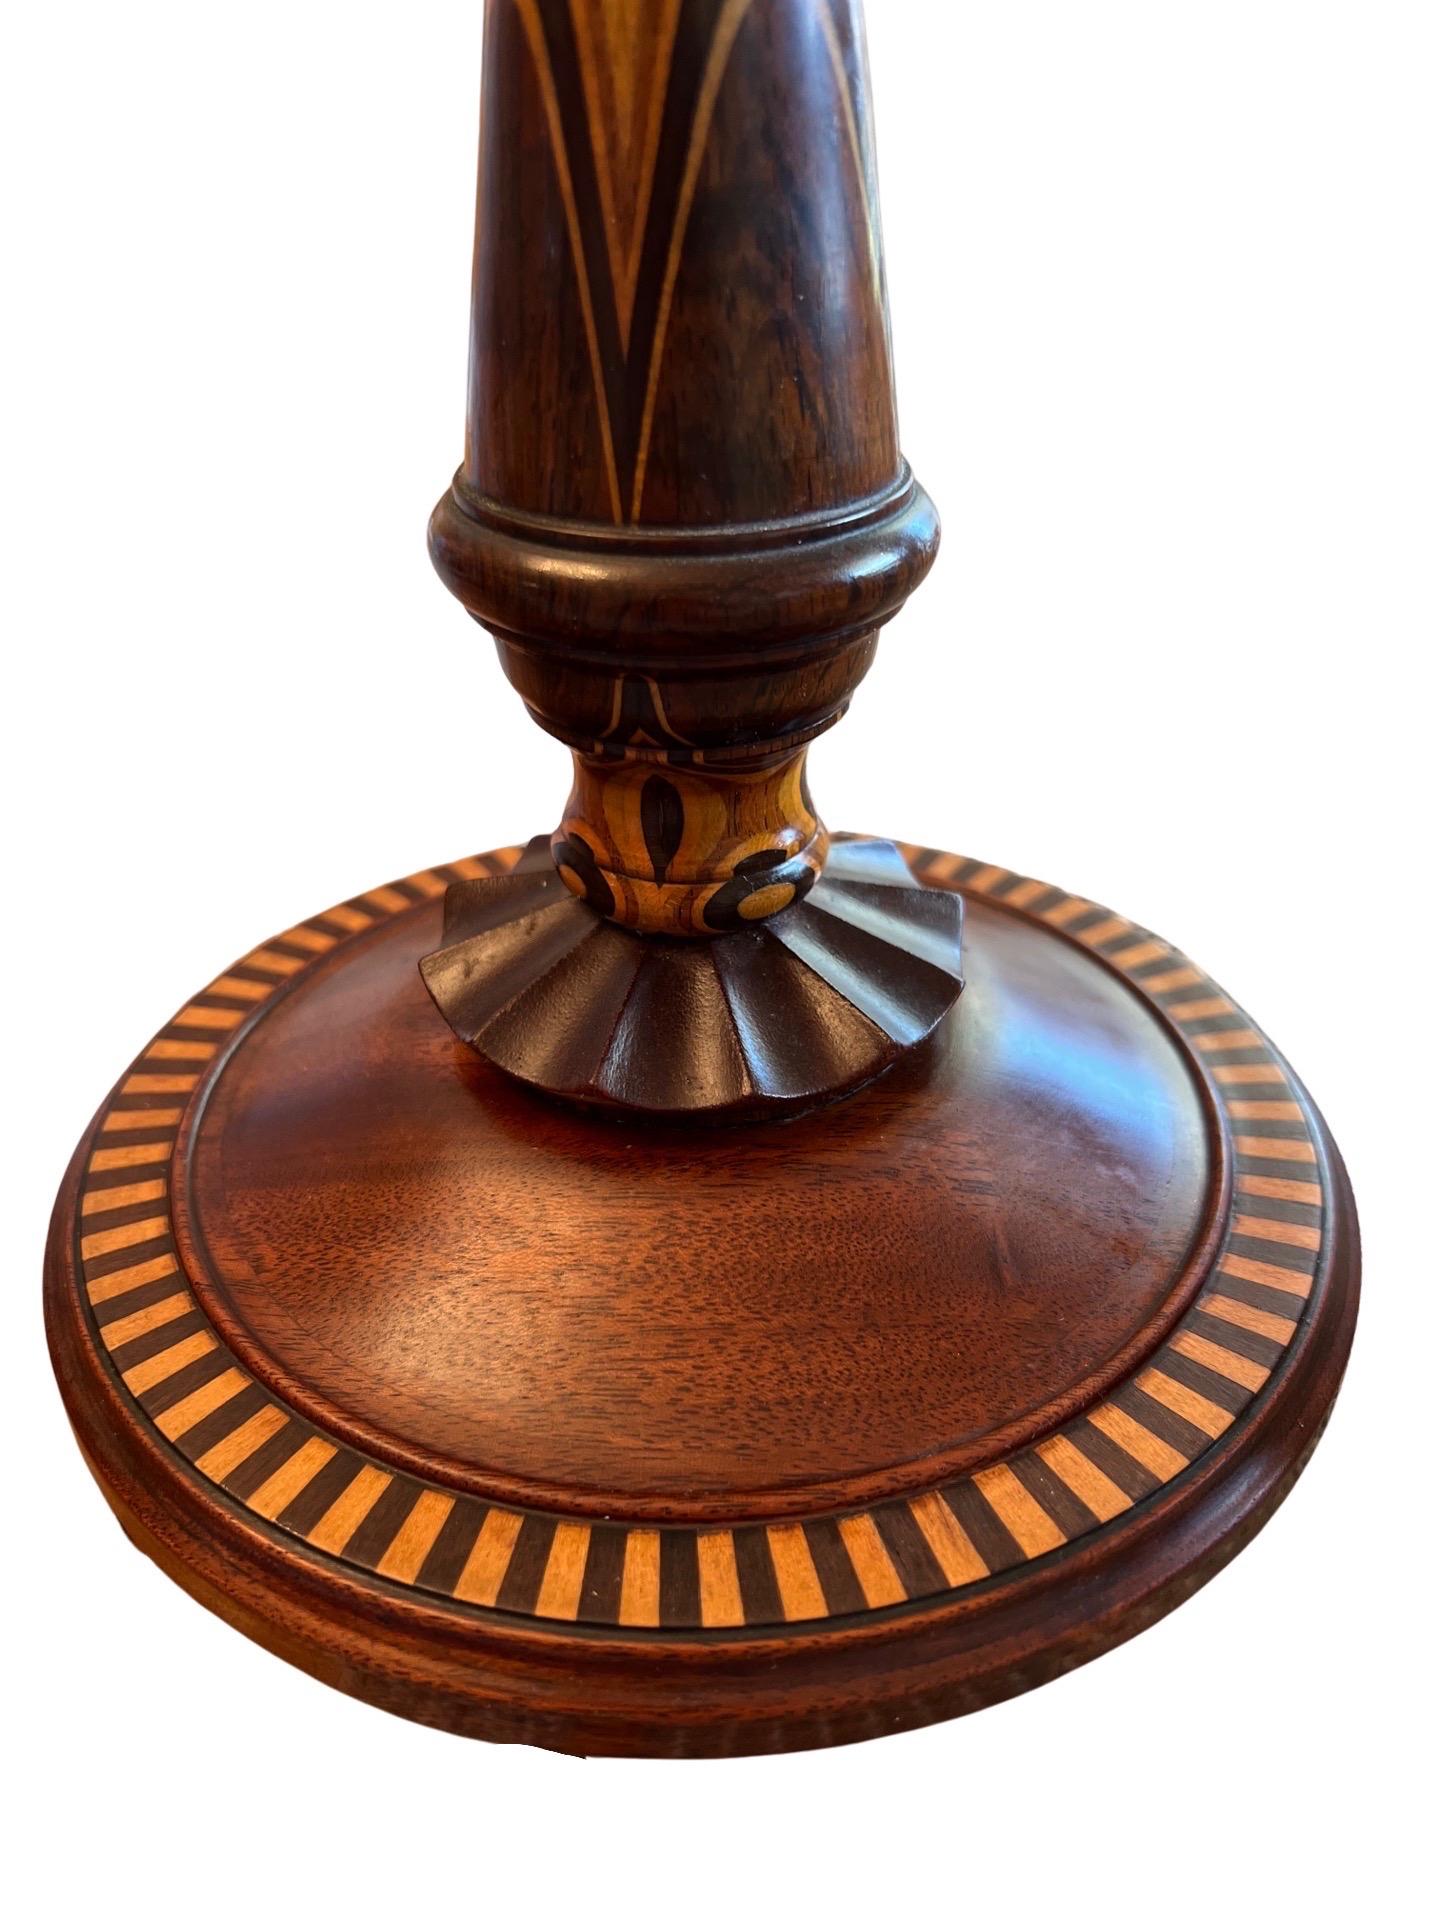 Fine American Turned Walnut & Mixed Marquetry Wood Candlesticks, circa 1925 For Sale 8